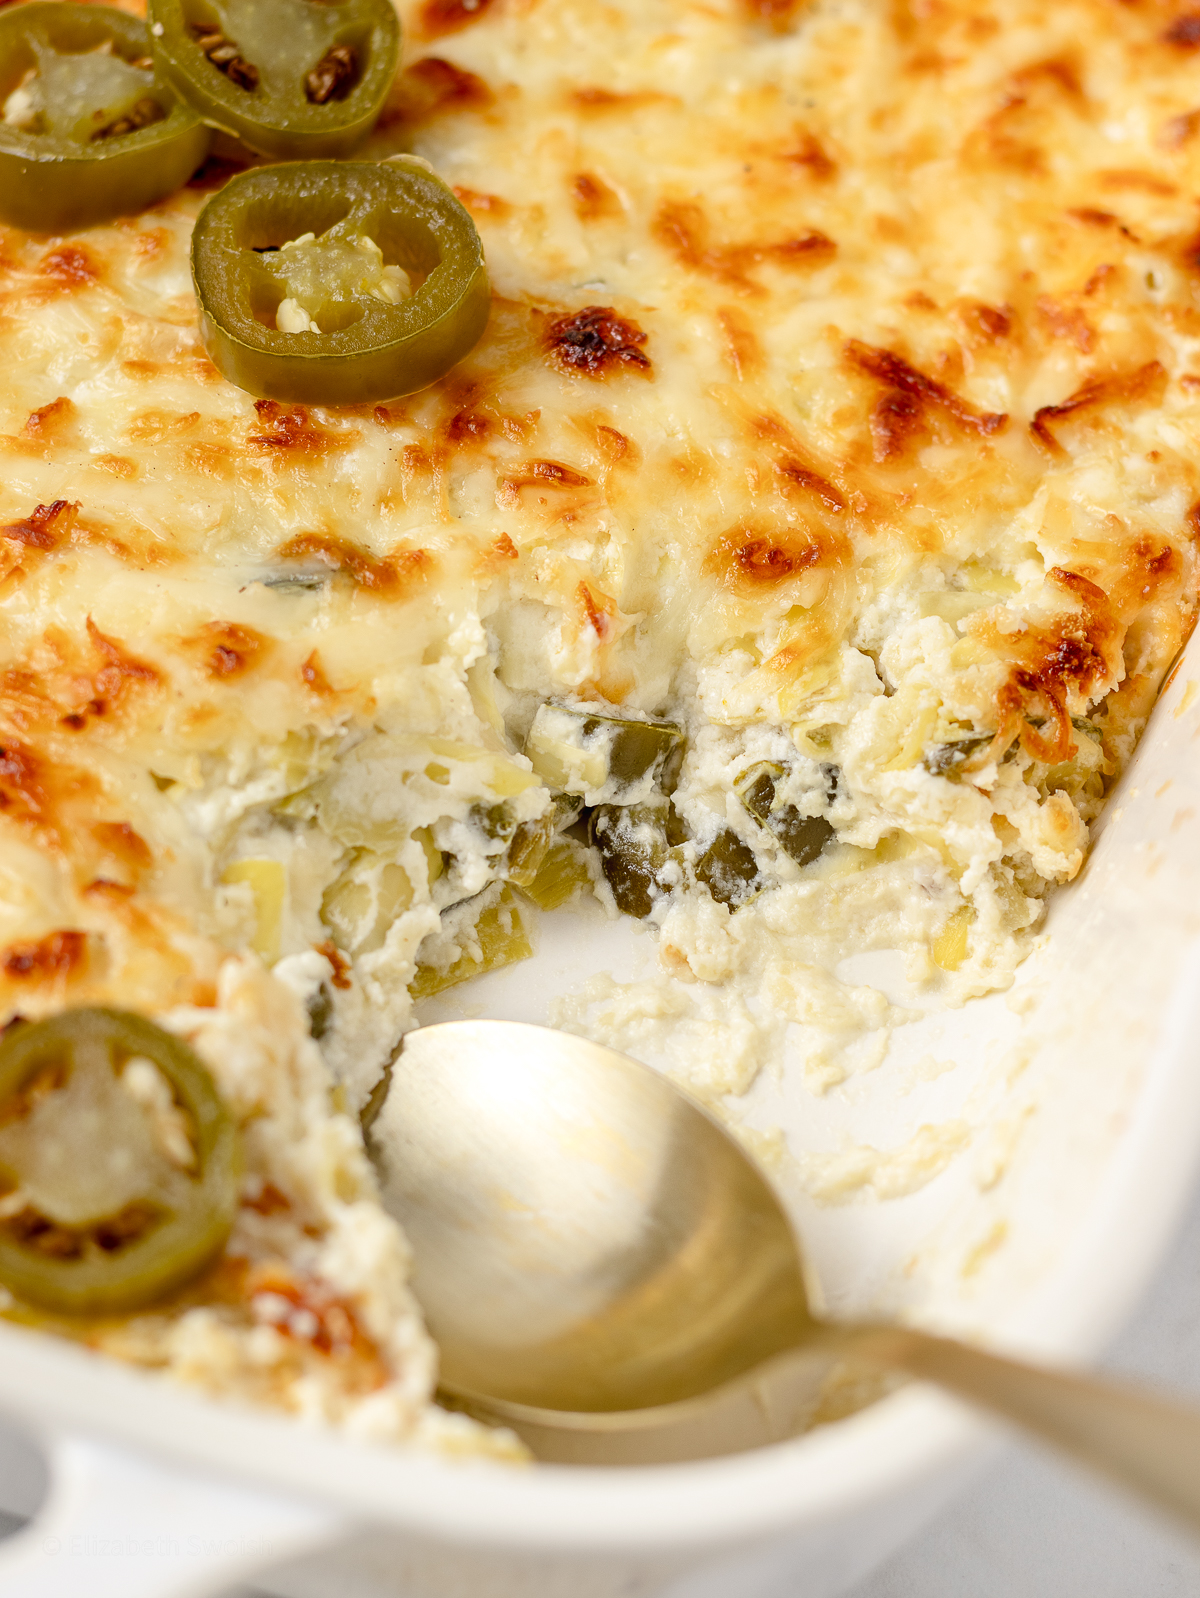 Jalapeno Artichoke Dip with spoon. Close up view to see the creamy dip with chunks of pickled jalapeno and artichoke hearts.